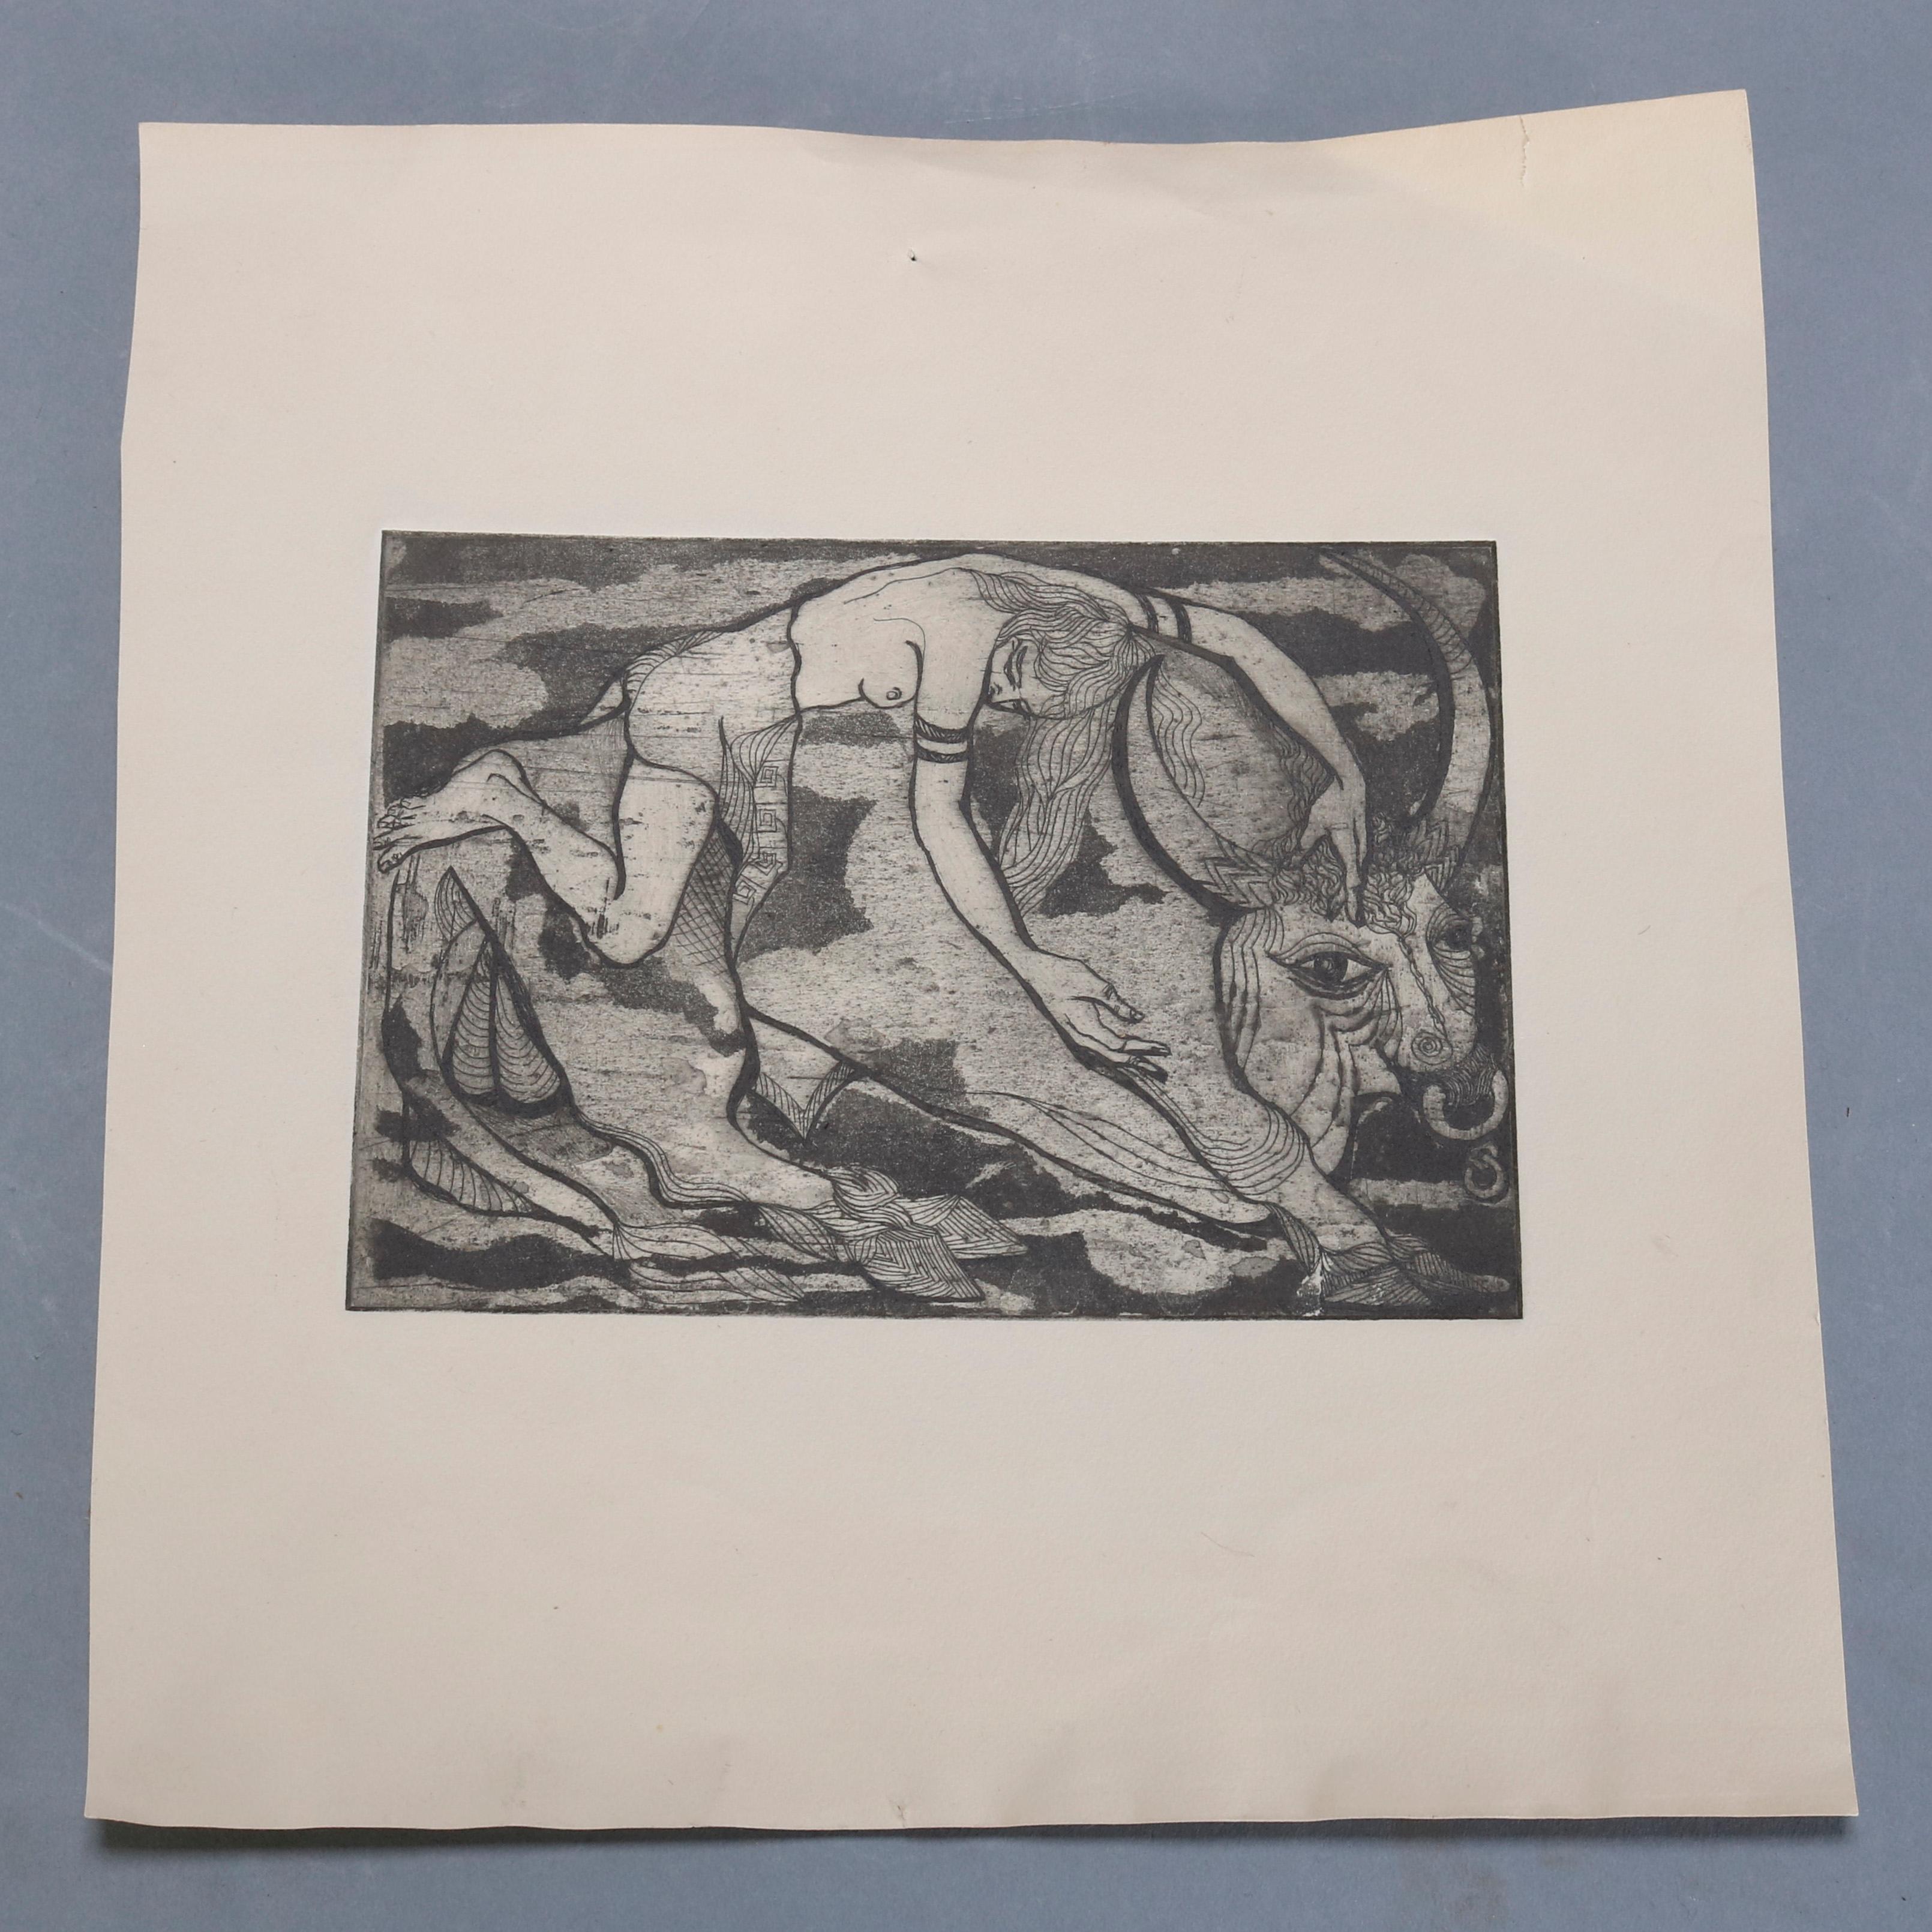 A collection of 4 James Joseph Kearns expressionist lithographs depict figures in various settings, circa 1954


Measures: 1: 8